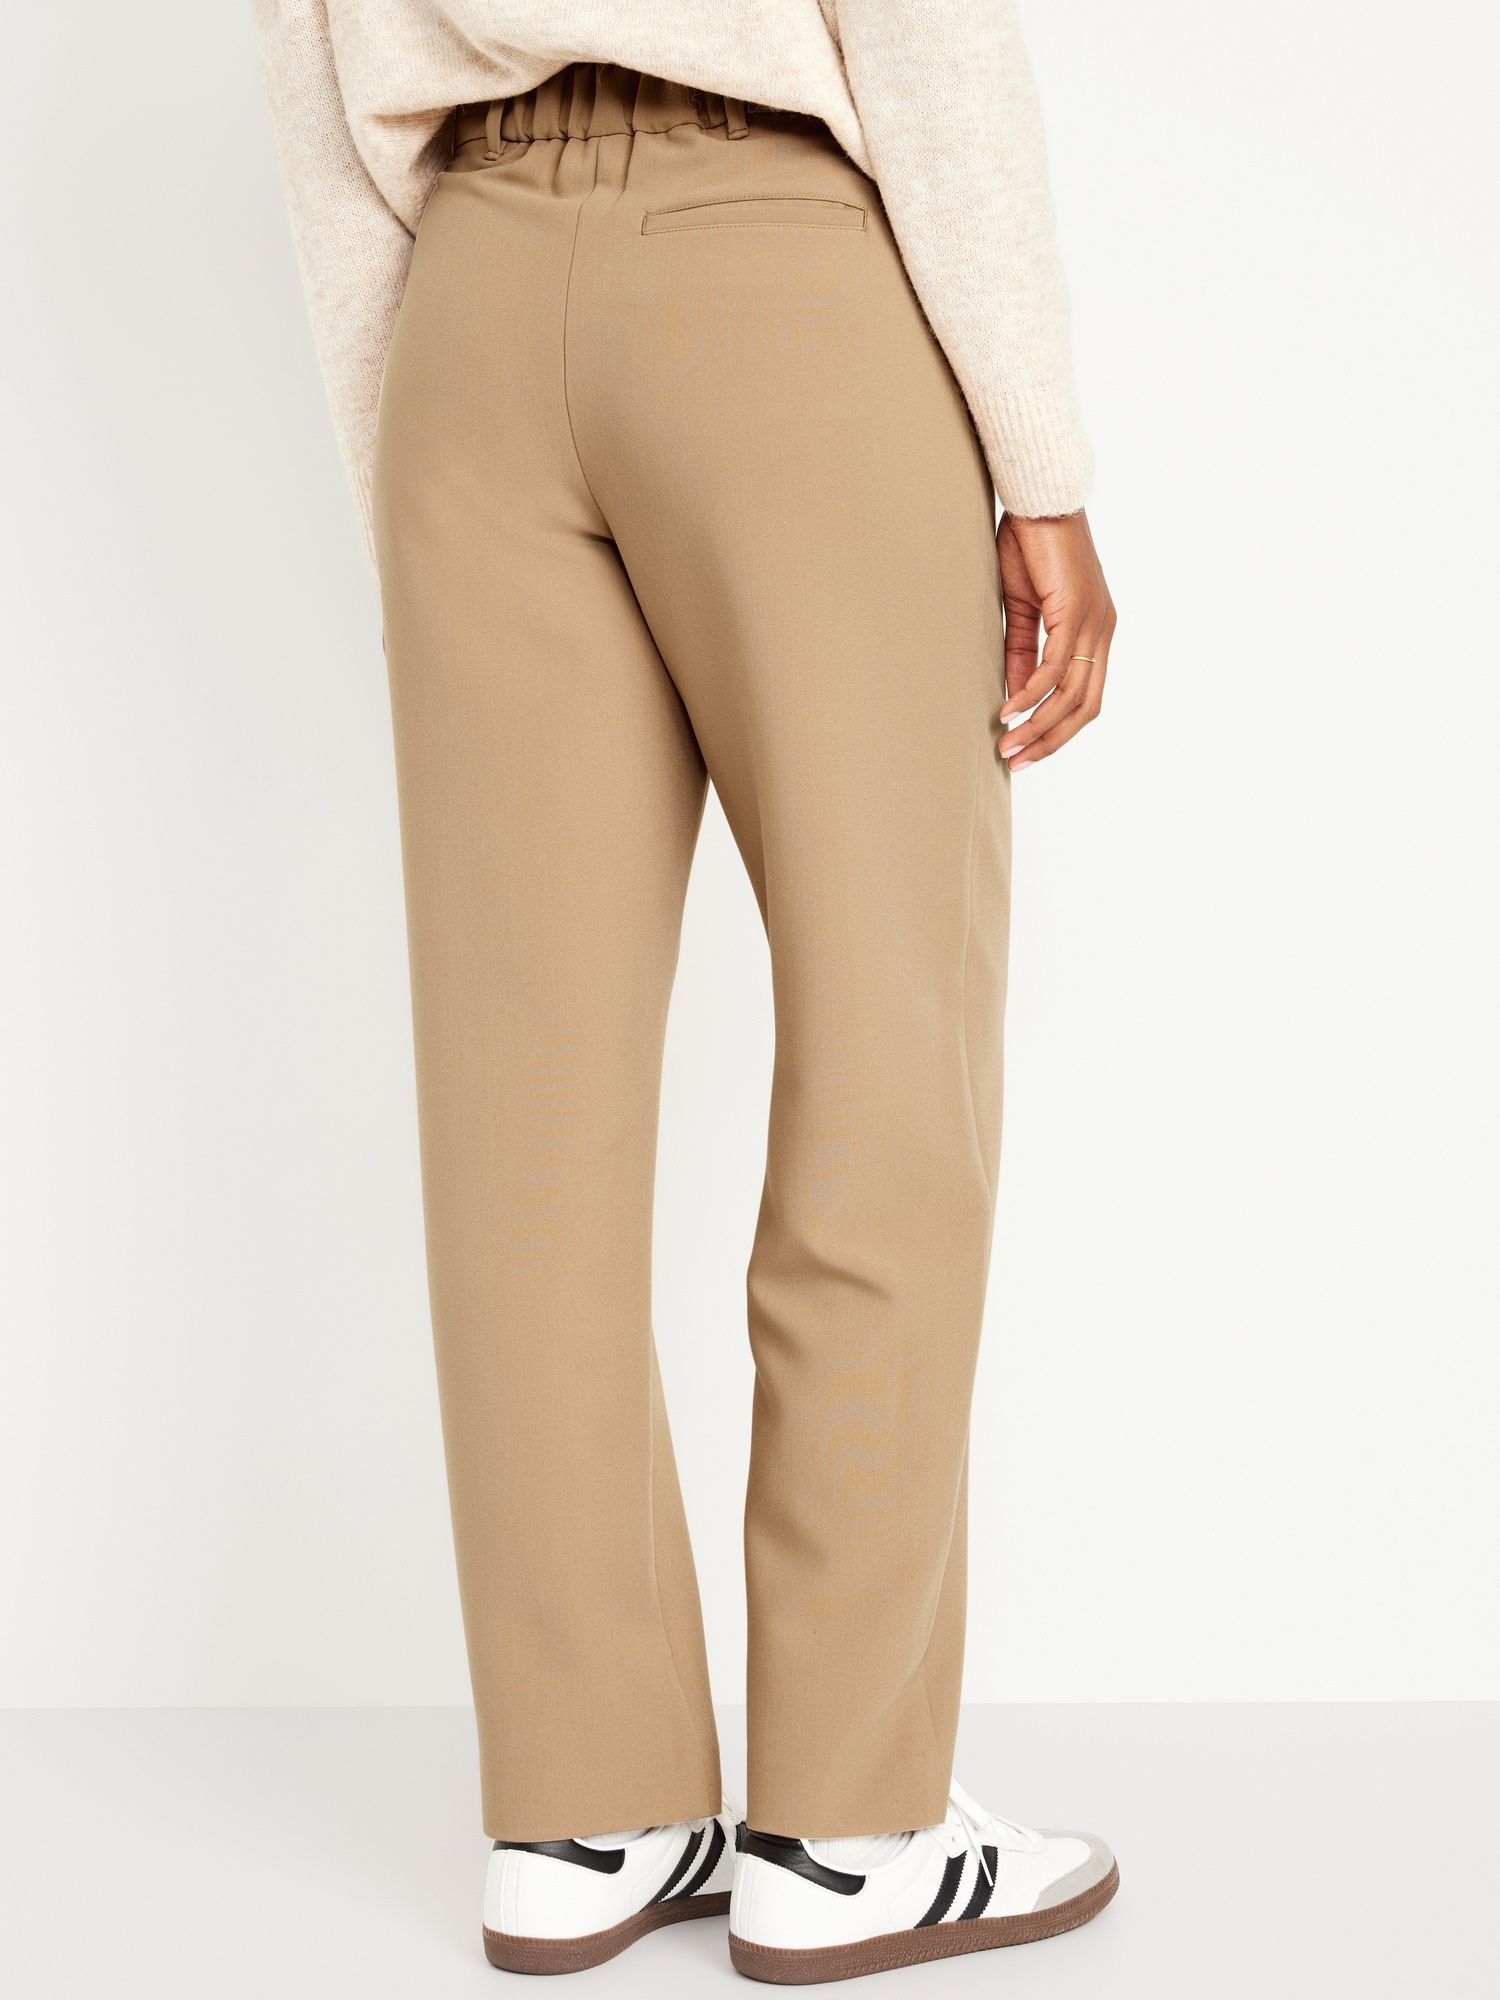 Old Navy Women's Extra High-Waisted Pleated Taylor Trouser Pants